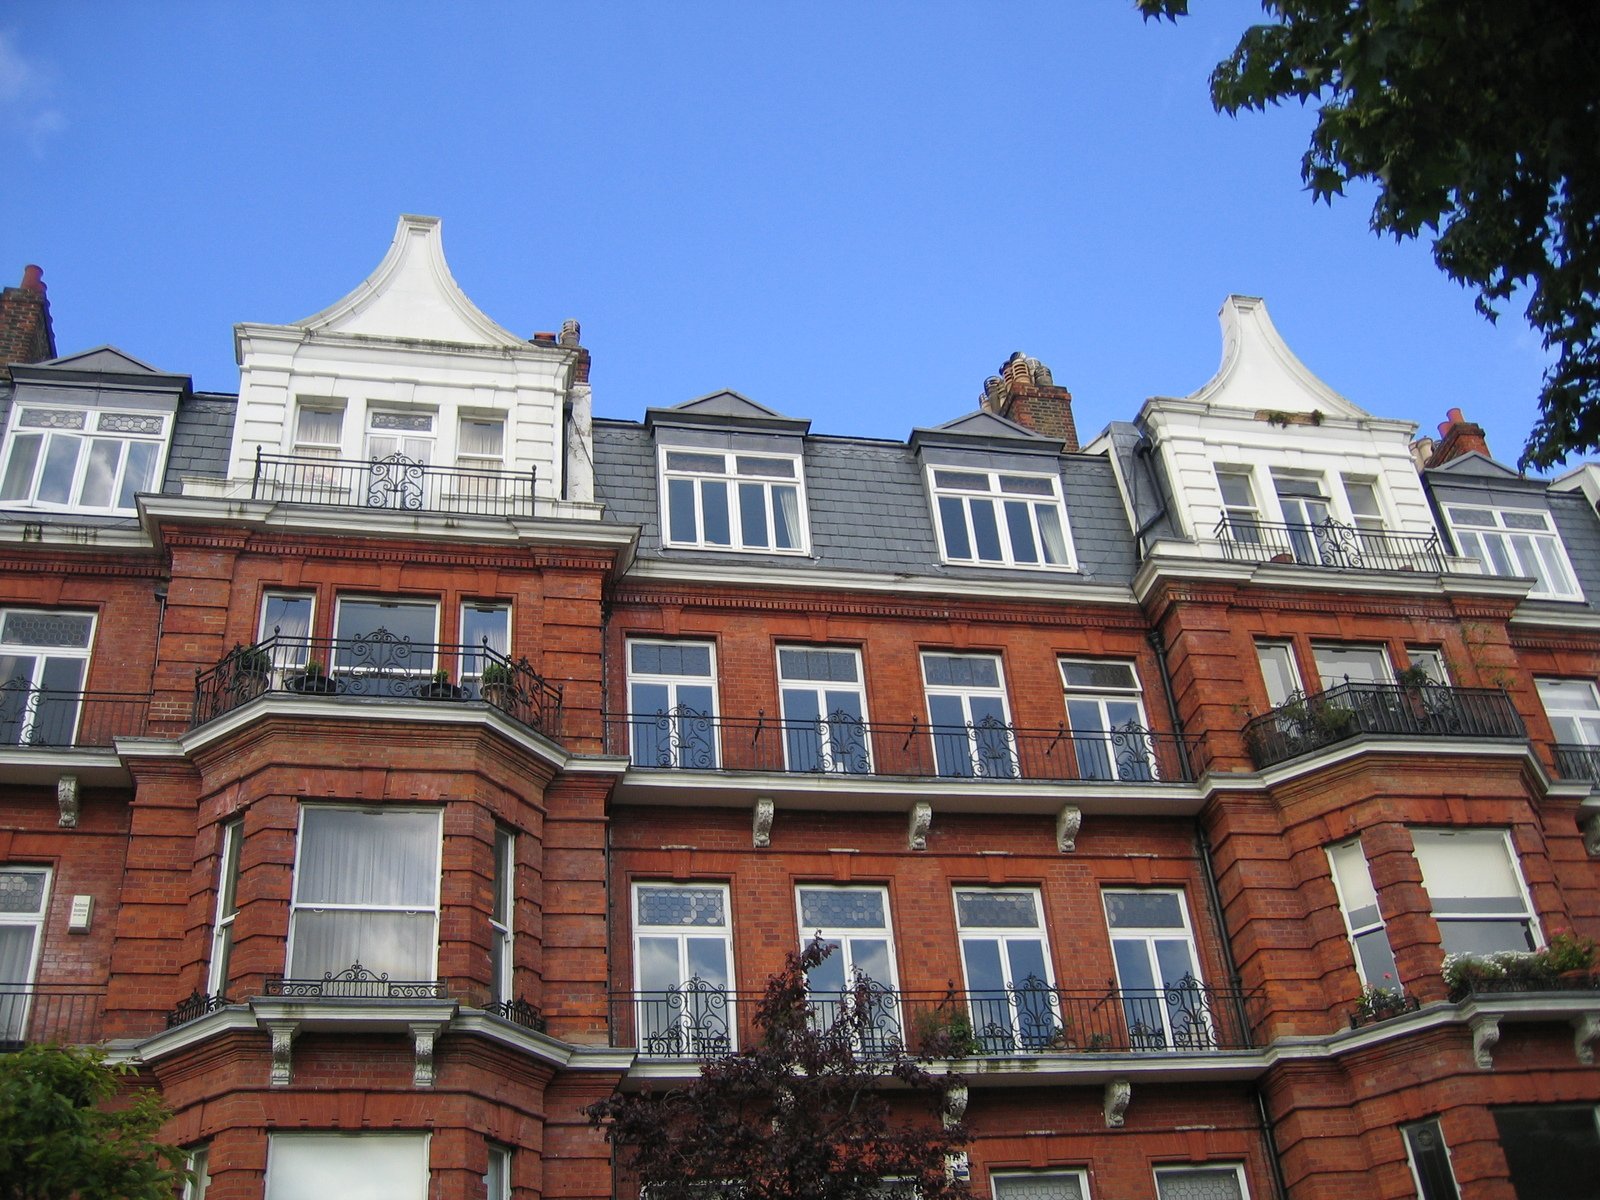 a large red brick building with many windows and balconies